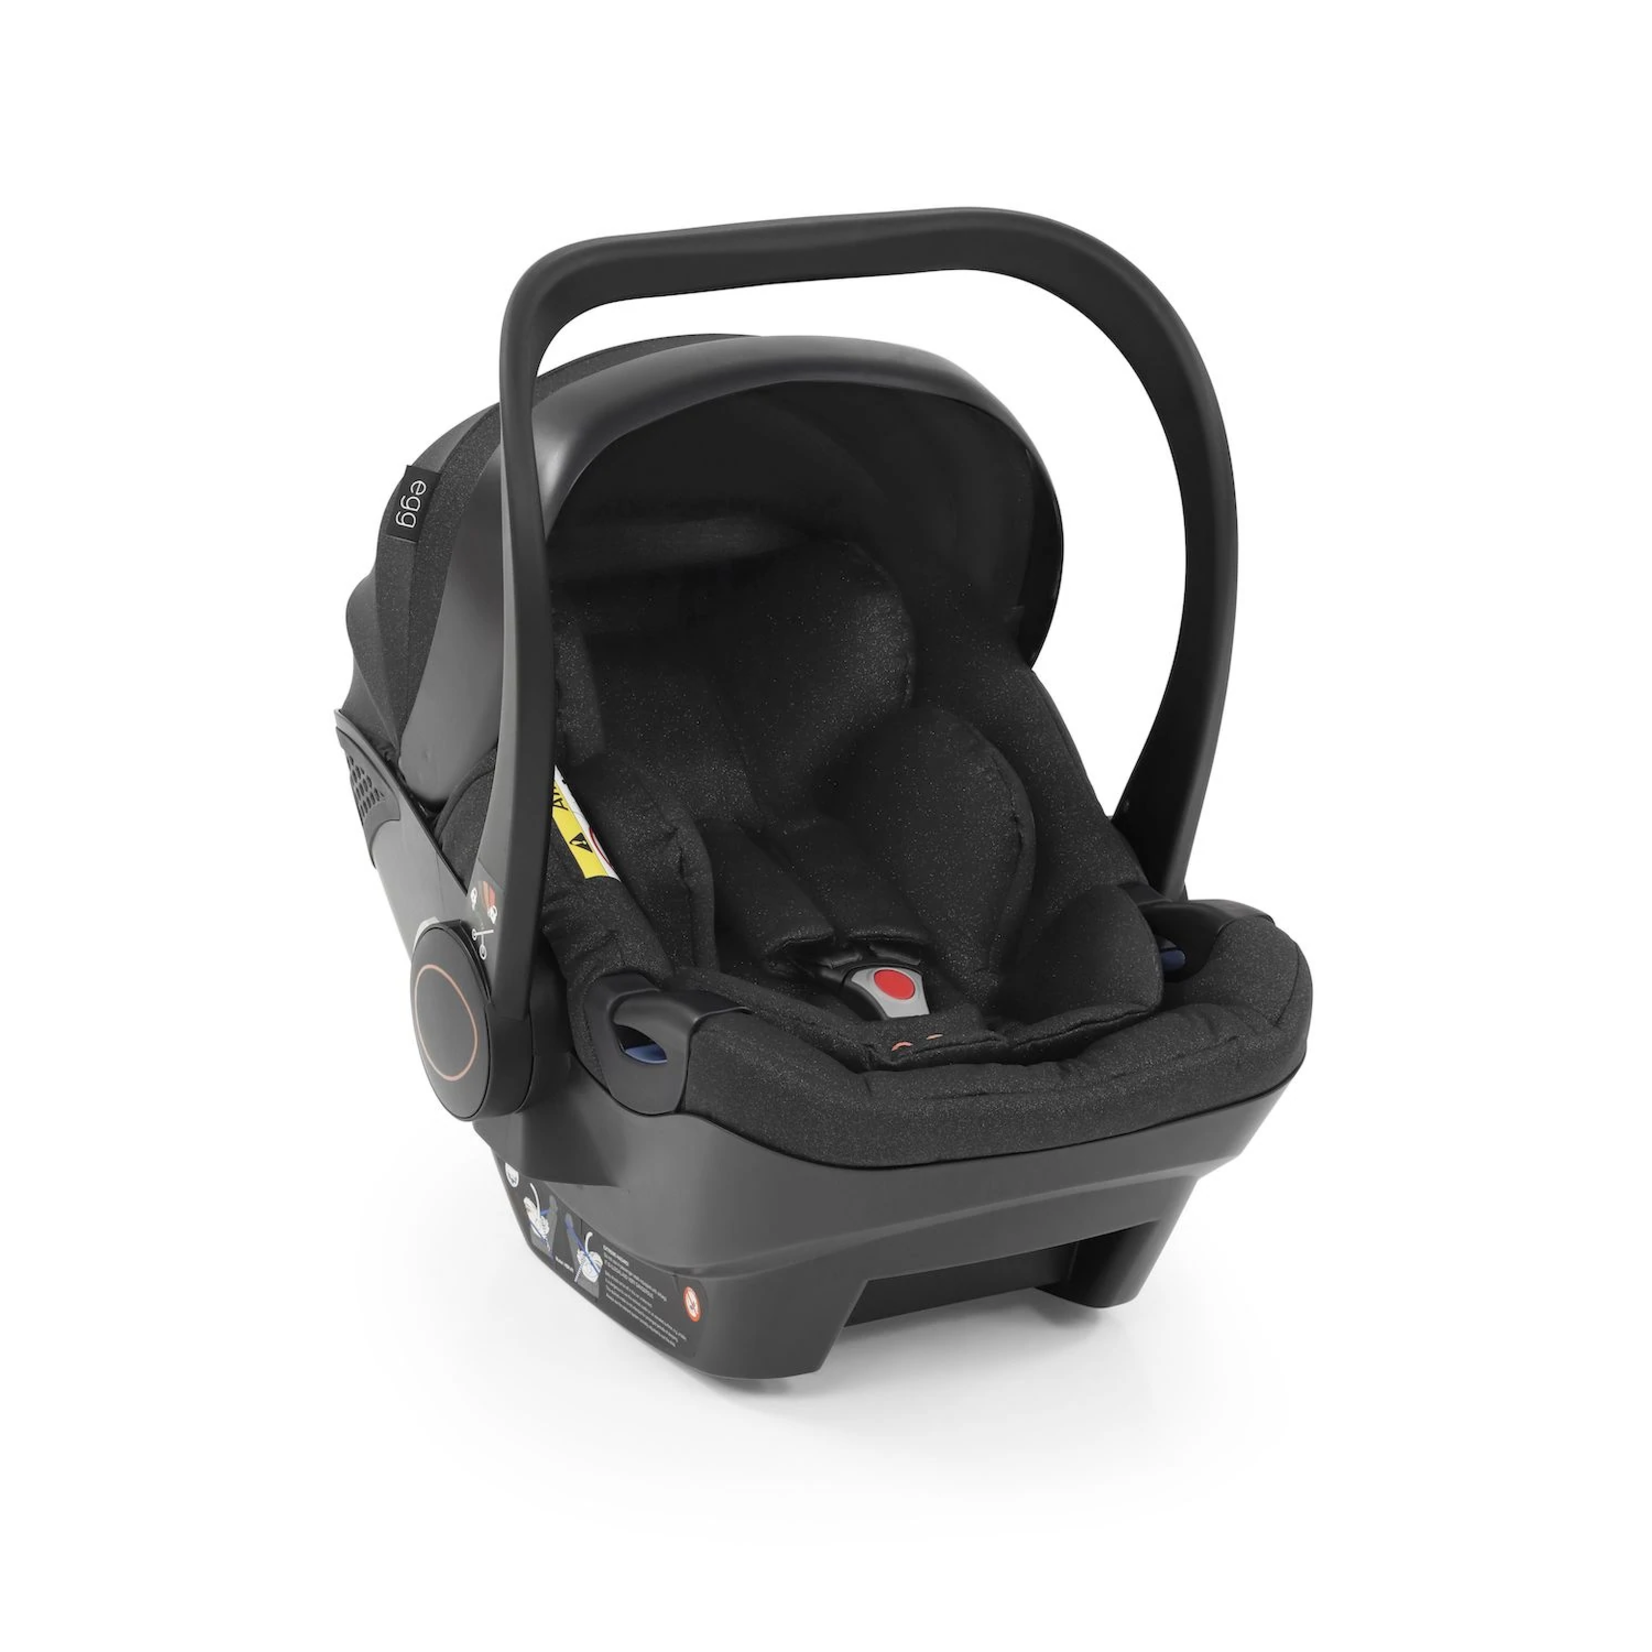 EGG EGG 2 ( 2 IN 1 ) INFANT CARSEAT TRAVEL SYSTEM - DIAMOND BLACK (SPECIAL EDITION)